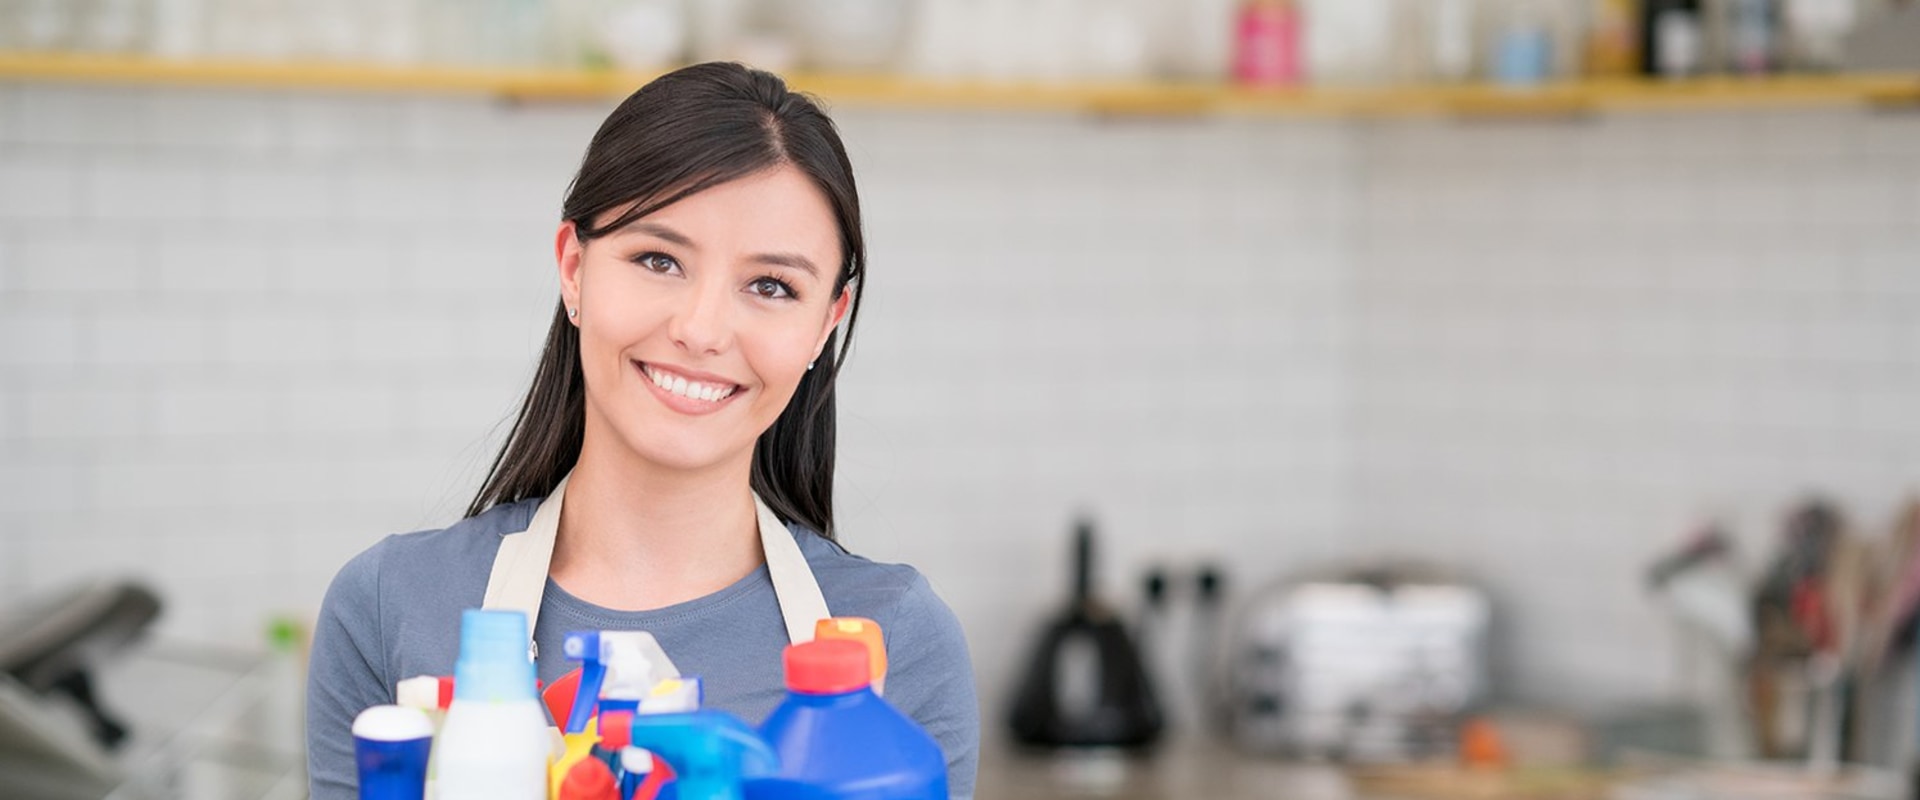 How profitable is a cleaning business?